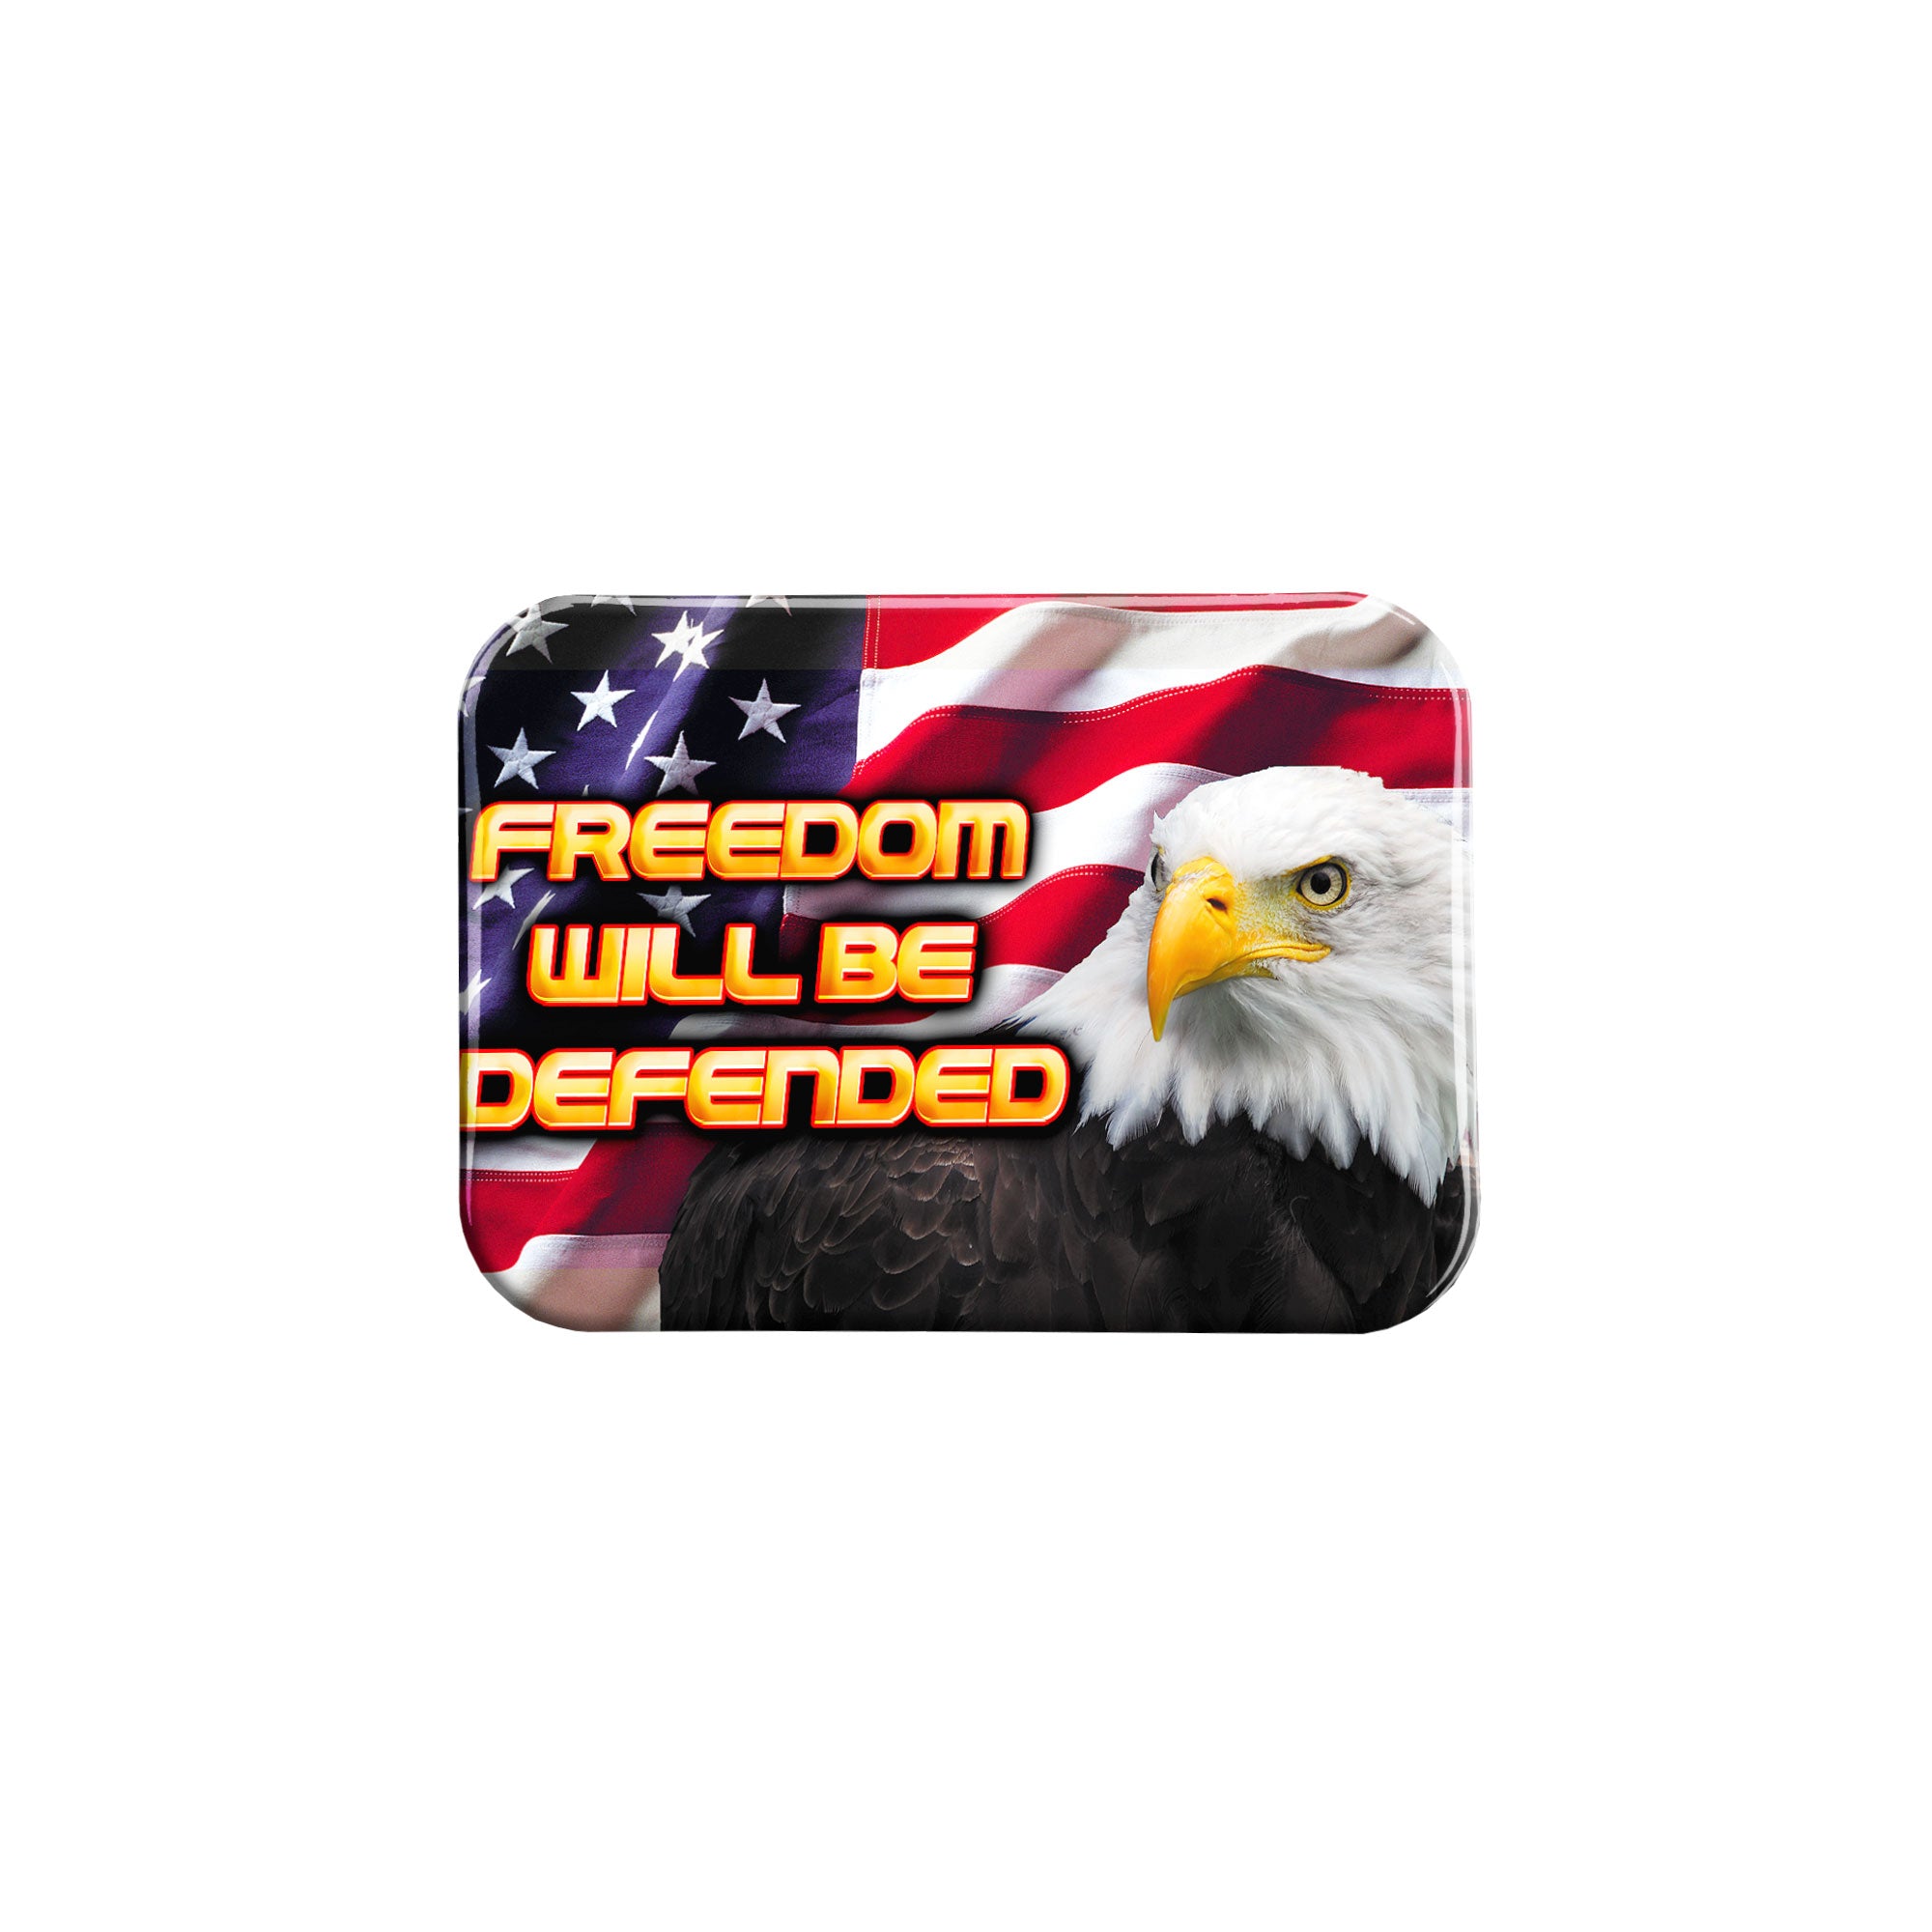 "Freedom will be Defended" - 2.5" X 3.5" Rectangle Fridge Magnets